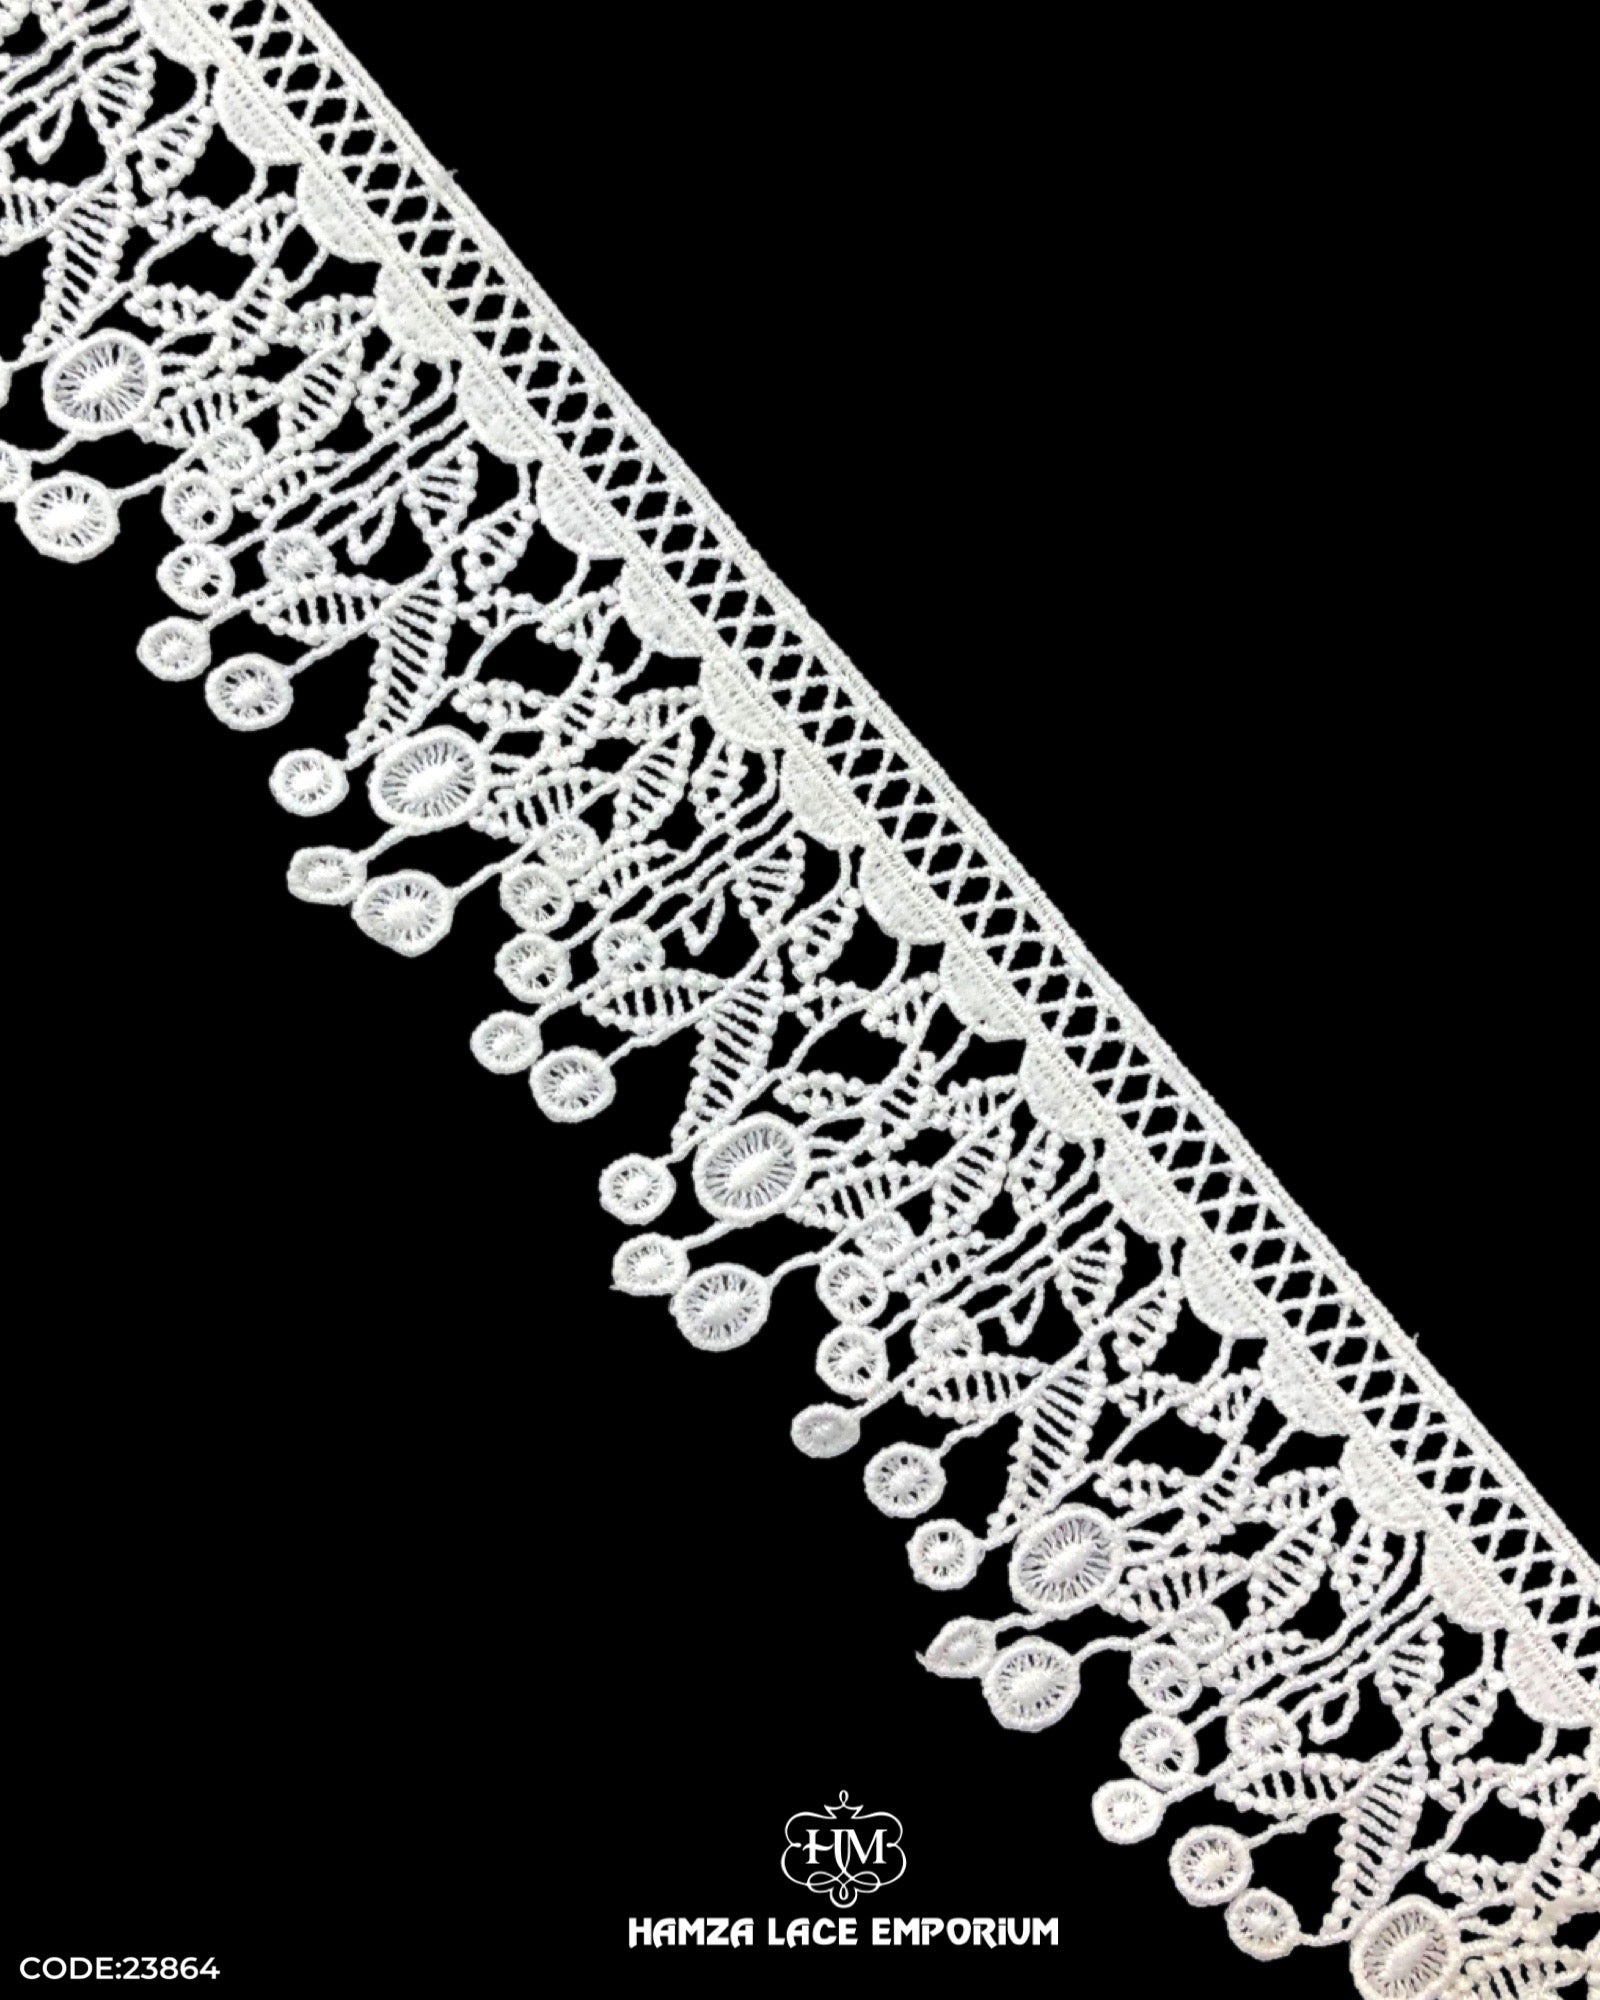 'Edging Flower Design Lace 23864' with the name 'Hamza Lace' written at the bottom